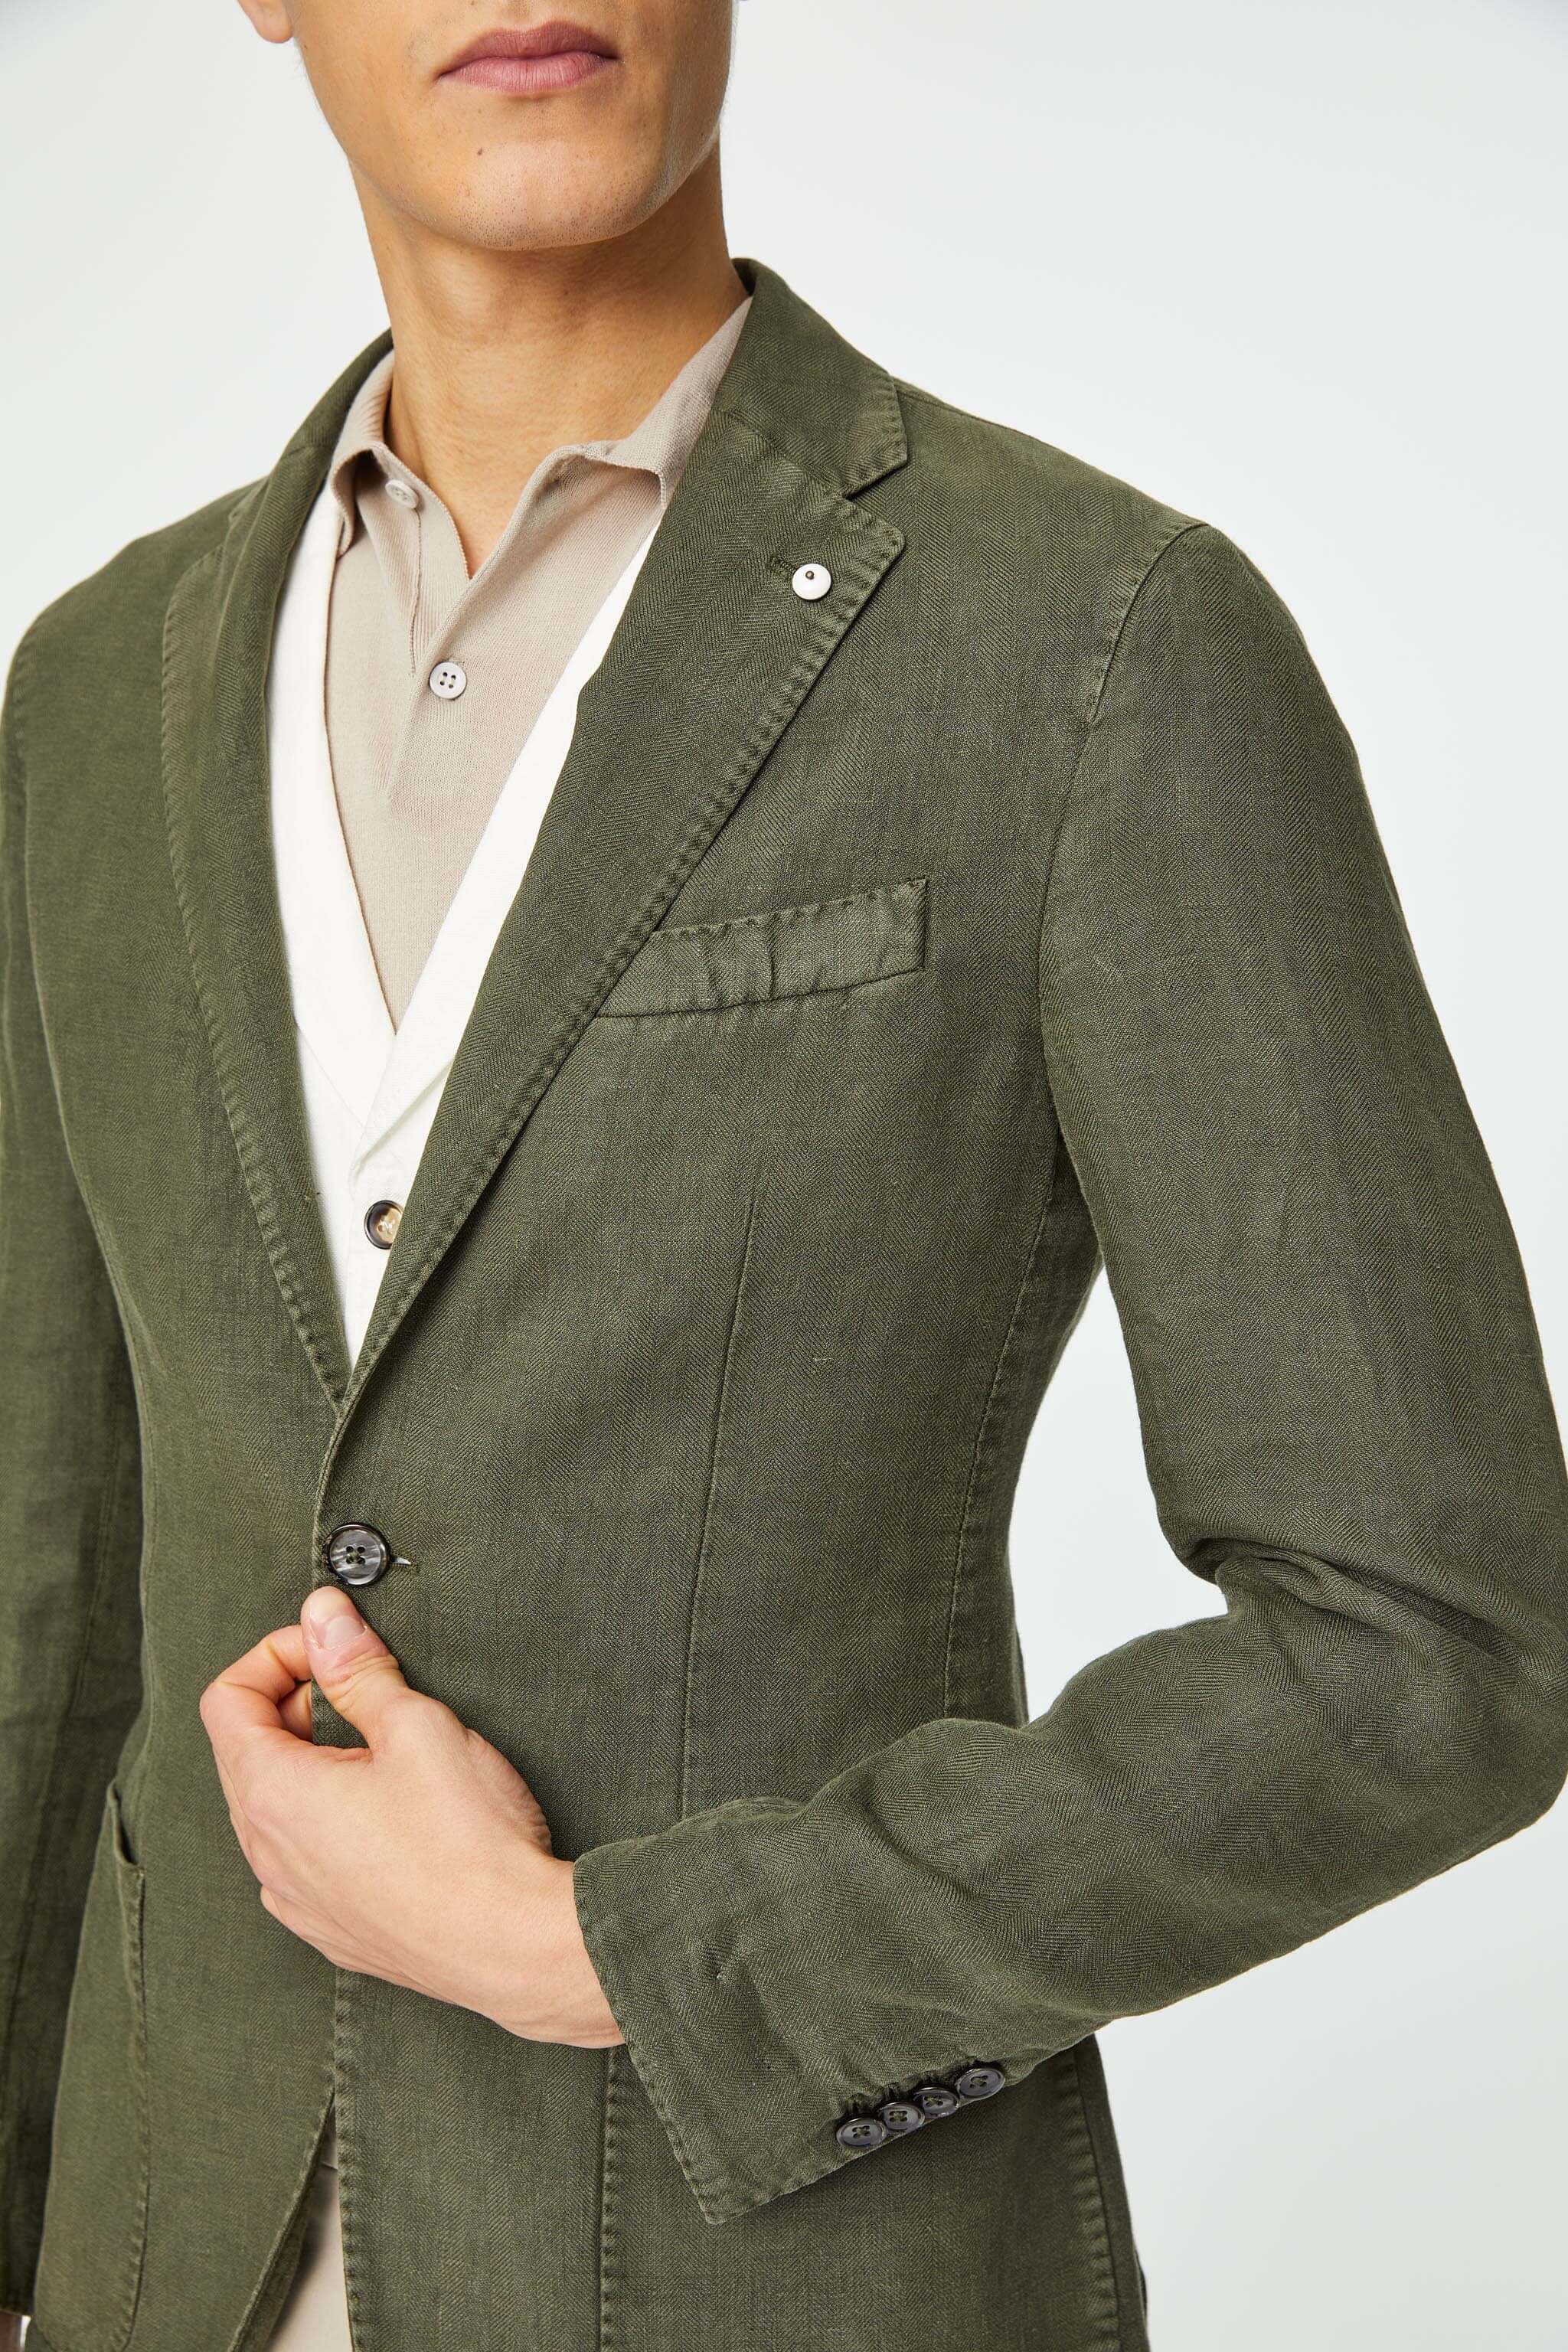 Garment-dyed JACK jacket in army green